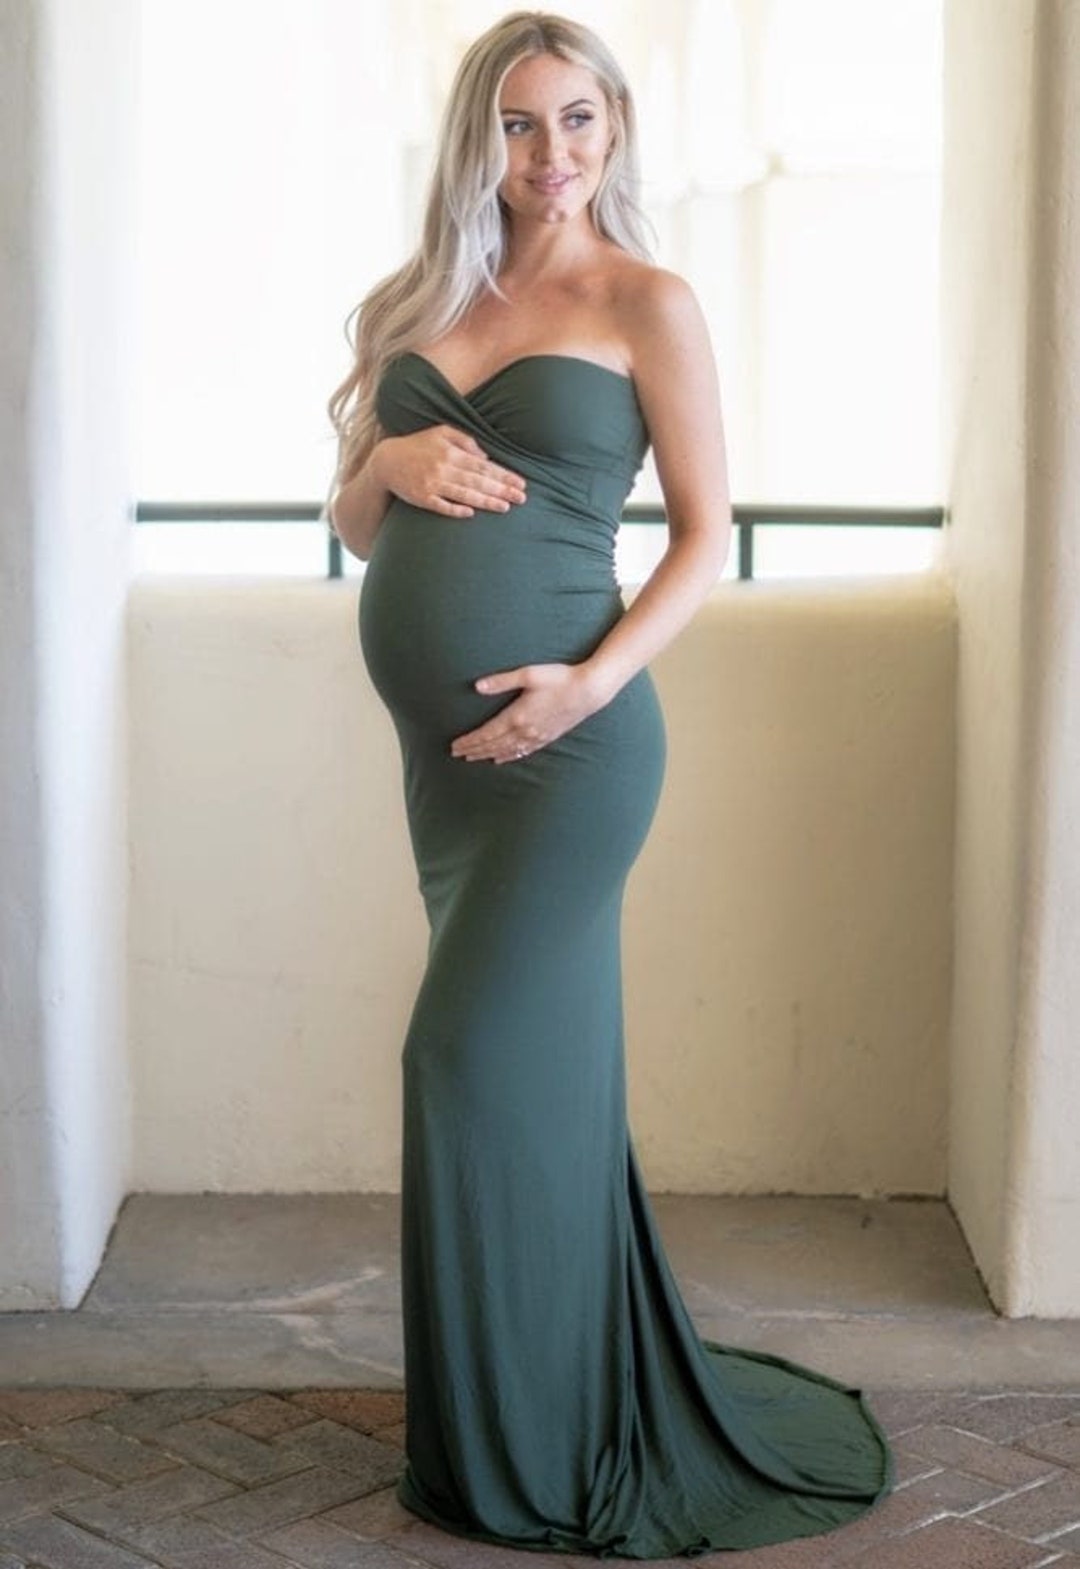 Ruched Fold Over Flare Maternity Gown with Bishop Sleeves